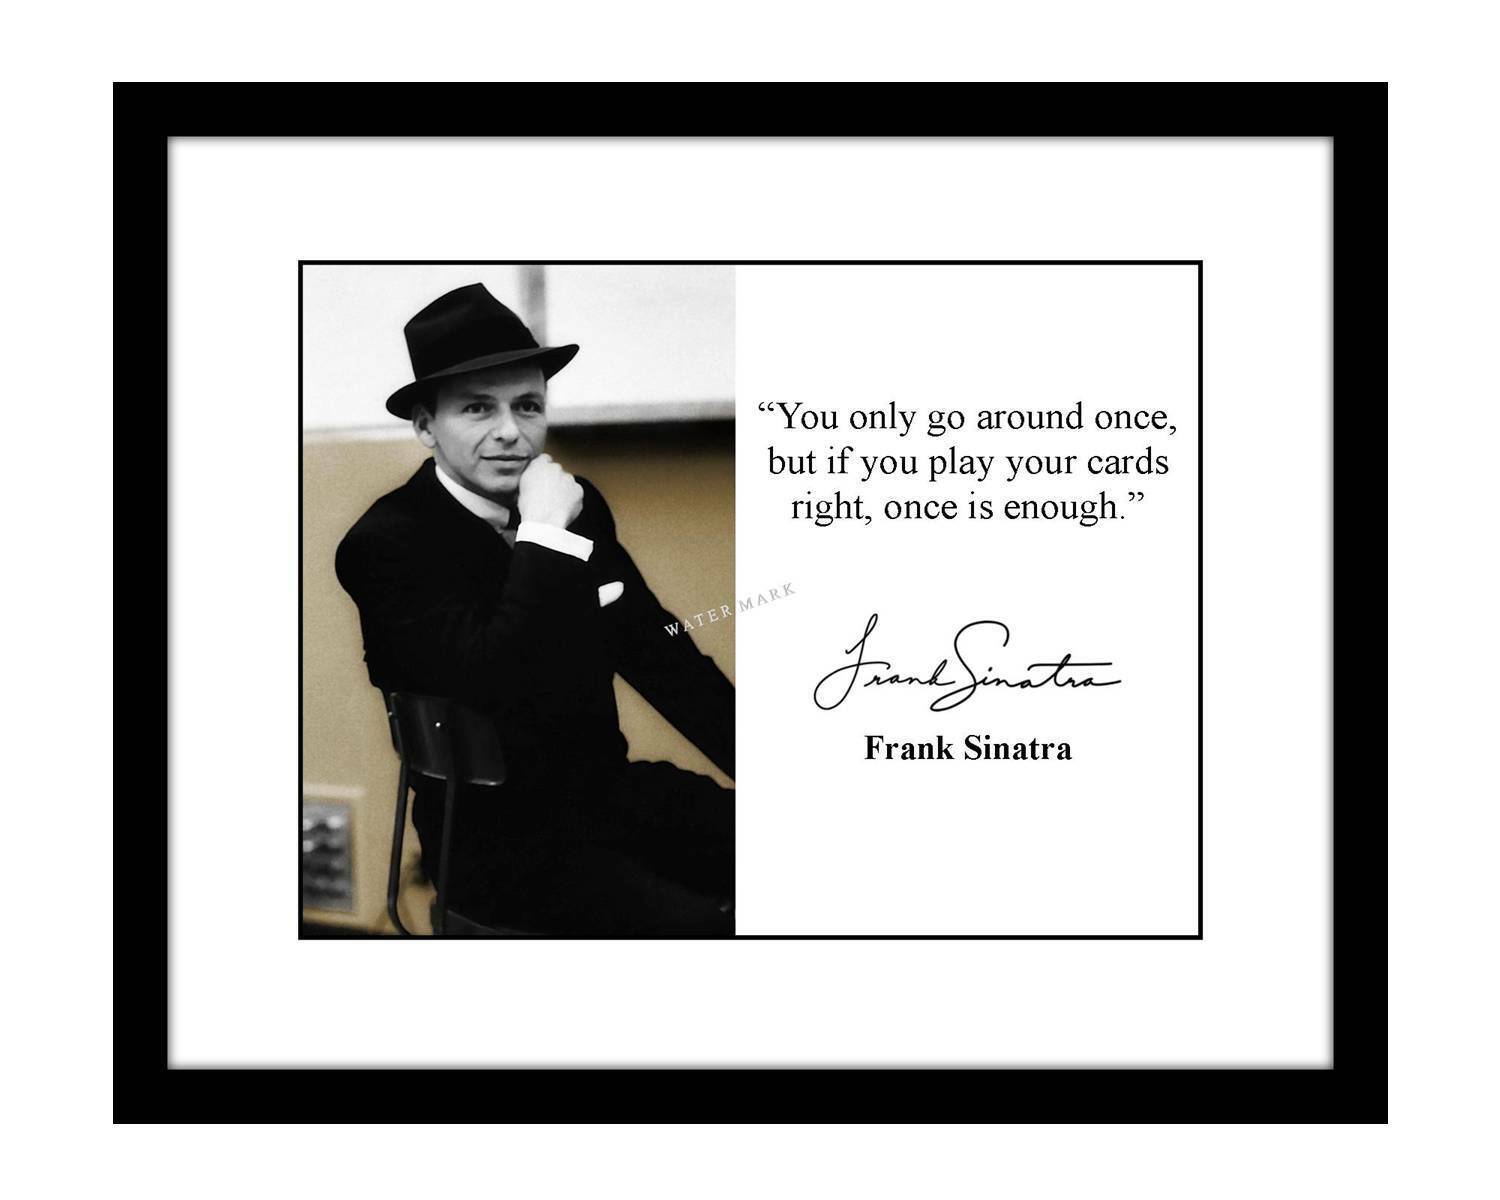 Frank Sinatra 8x10 Signed Photo Print you only go around once quote autographed